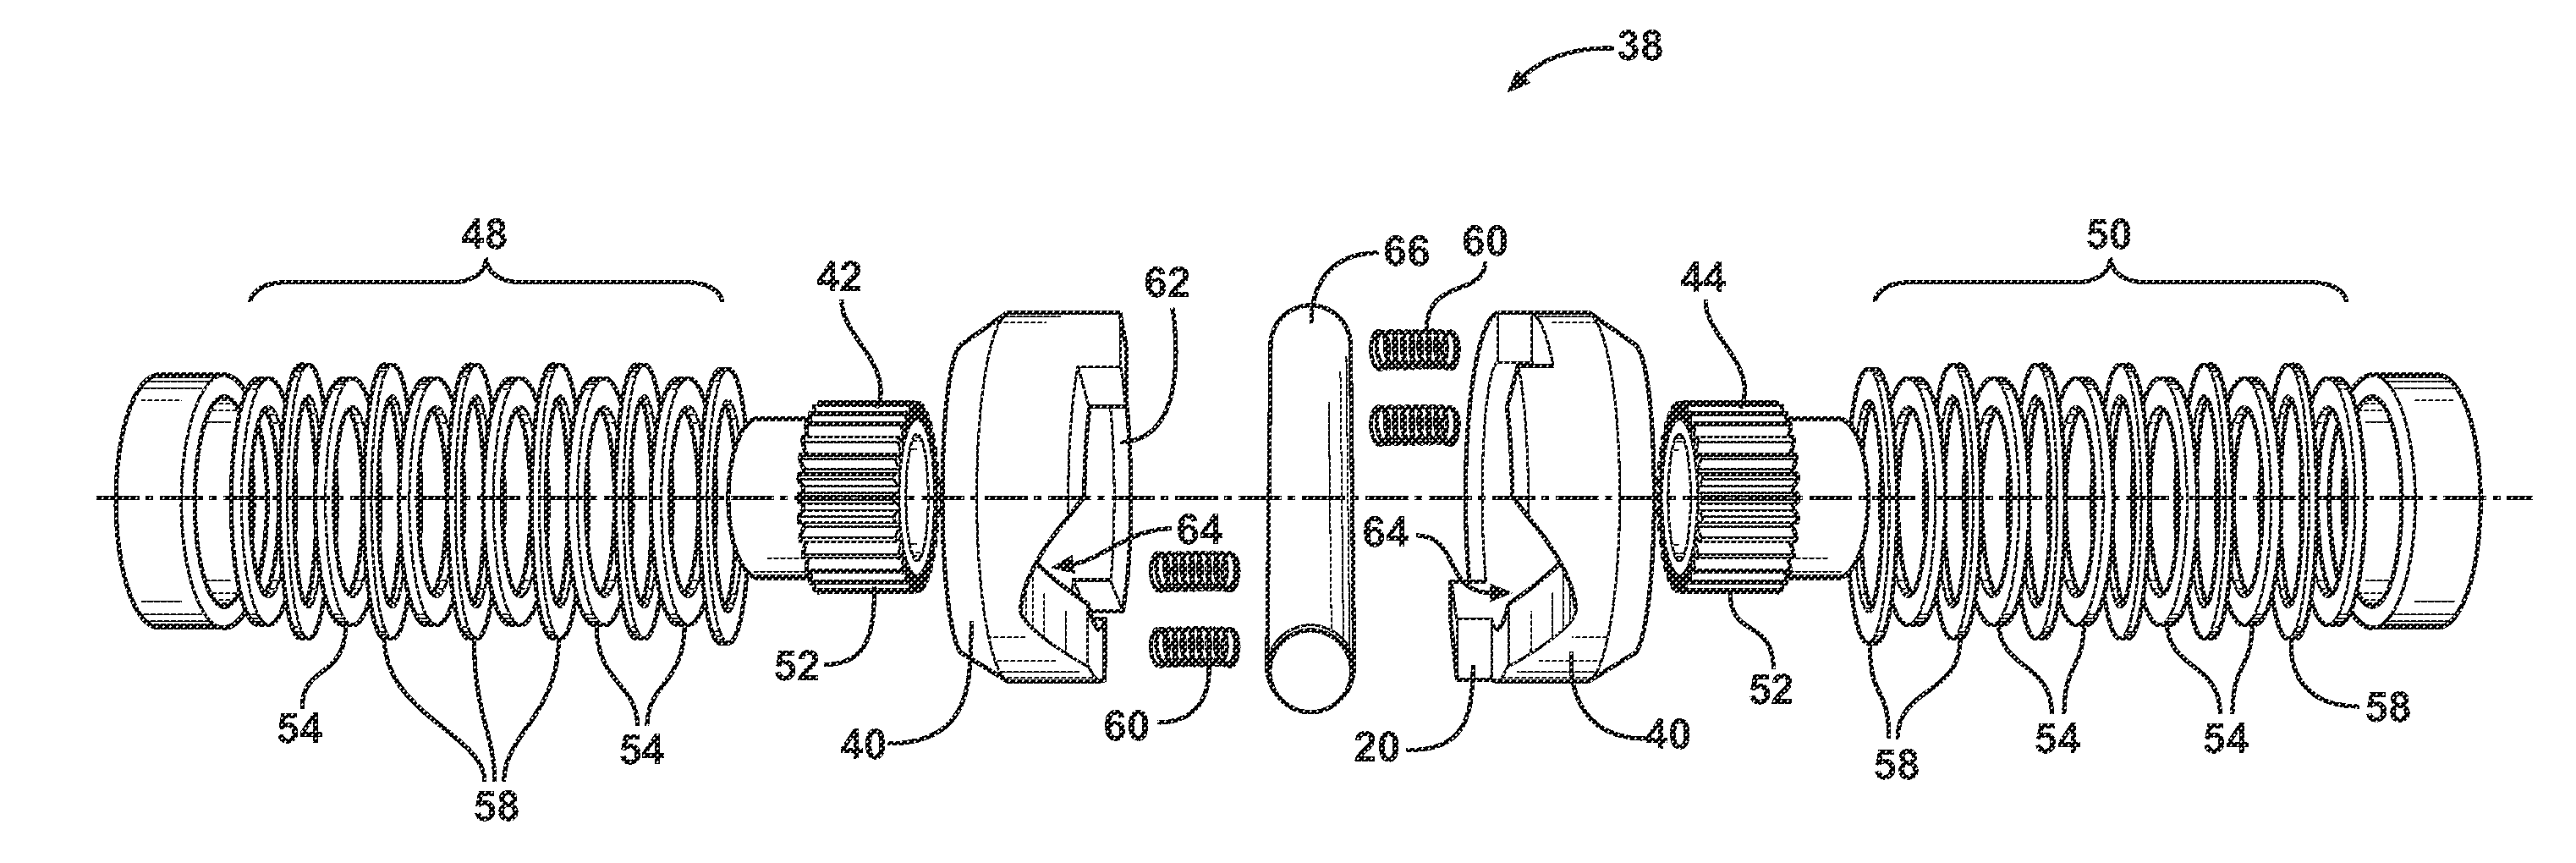 Differential having improved torque capacity and torque density